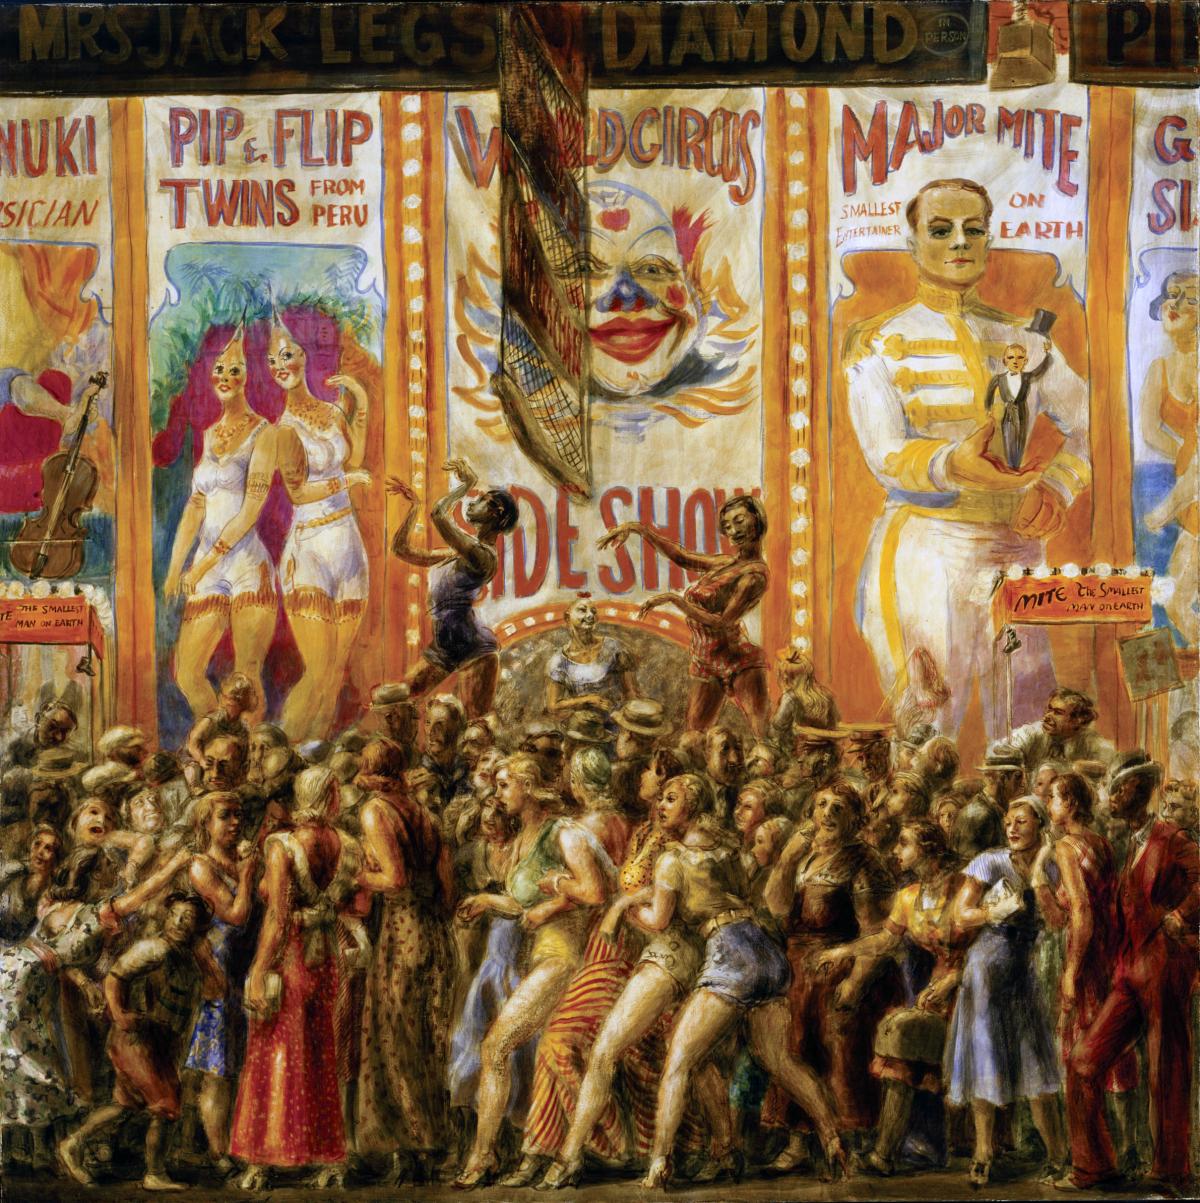 "Pip and Flip" by Reginald Marsh, depicting a freak show, siamese twins, and a huge crowd of people